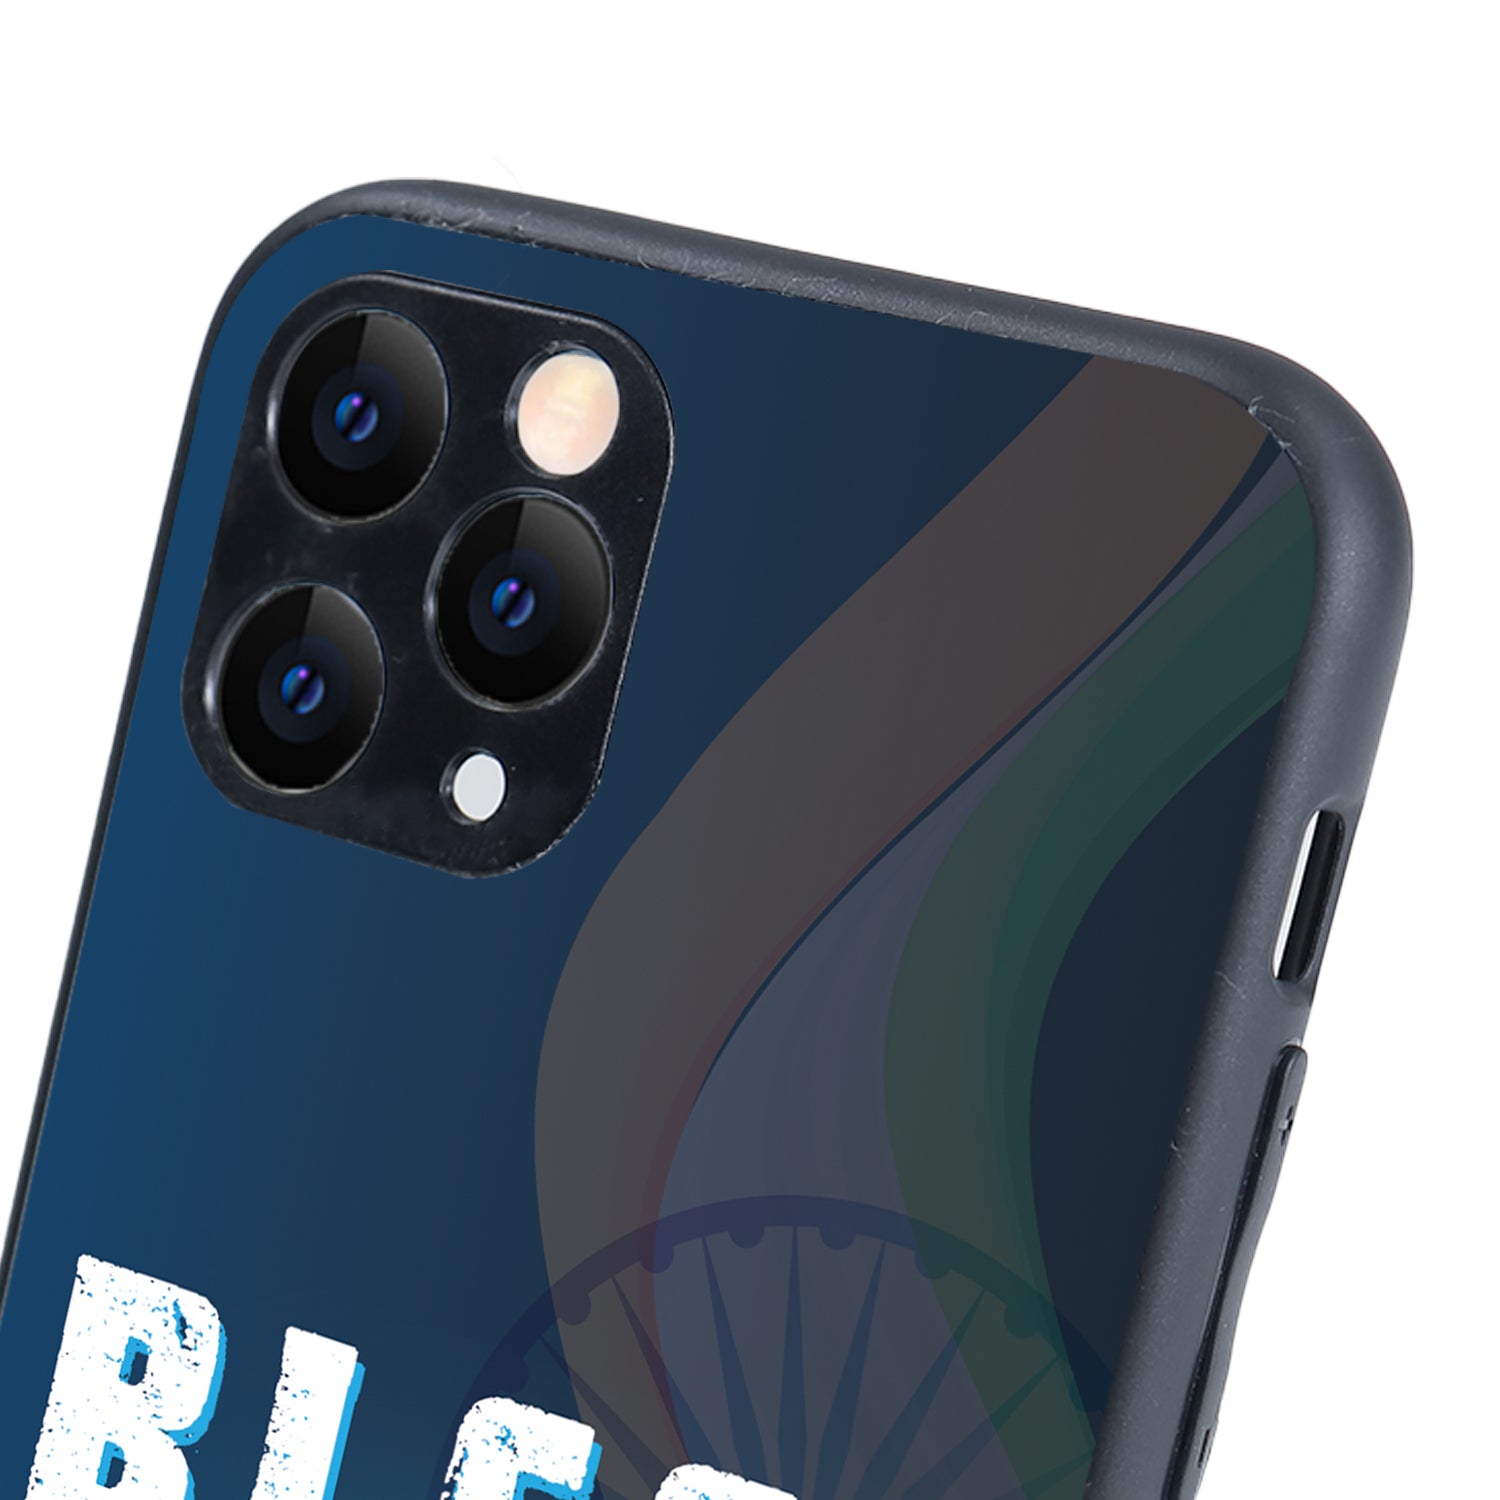 Bleed Blue Sports iPhone 11 Pro Case